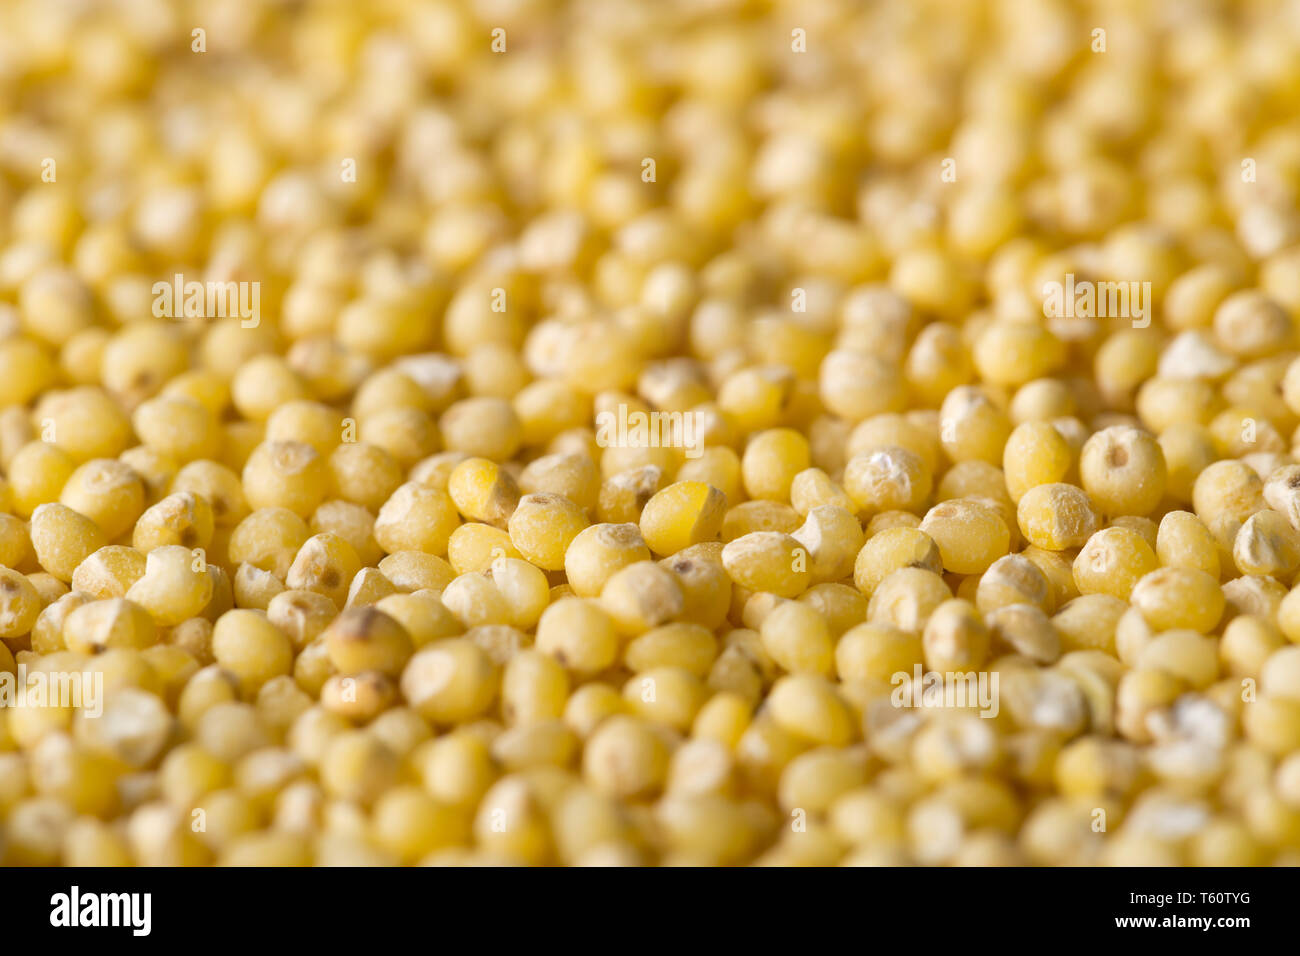 Pile of golden millet, a gluten free grain seed, frame filling with selective focus Stock Photo